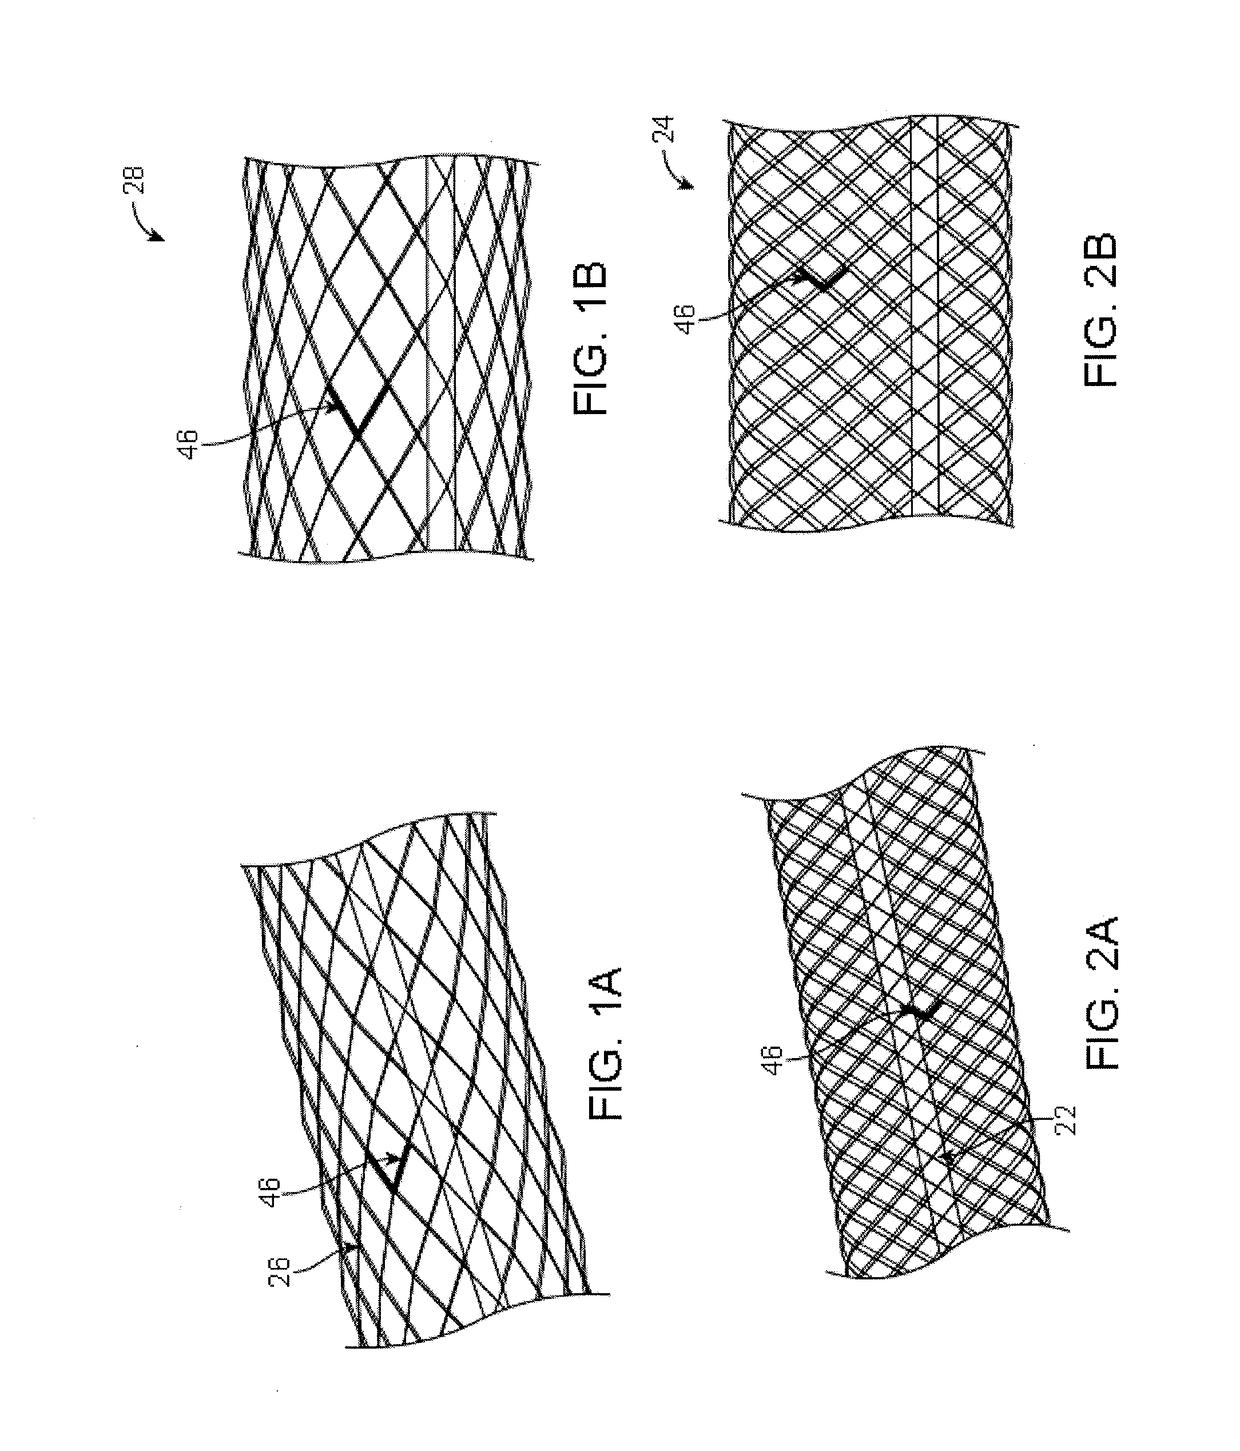 Vaso-occlusive devices and methods of use